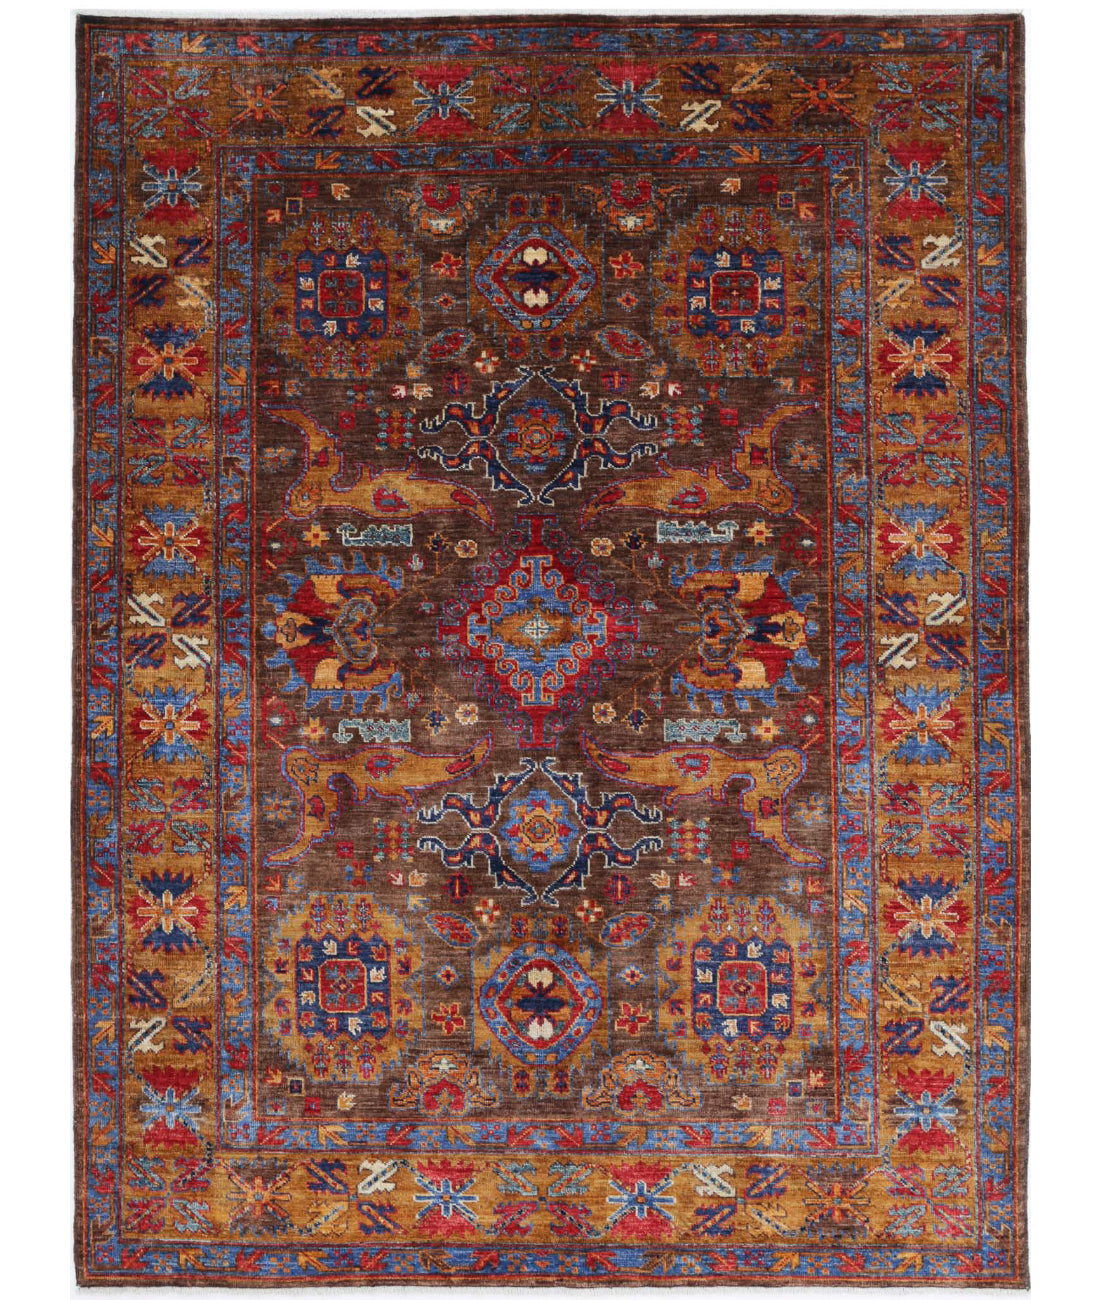 Hand Knotted Nomadic Caucasian Humna Wool Rug - 4&#39;11&#39;&#39; x 6&#39;9&#39;&#39; 4&#39;11&#39;&#39; x 6&#39;9&#39;&#39; (148 X 203) / Brown / Taupe